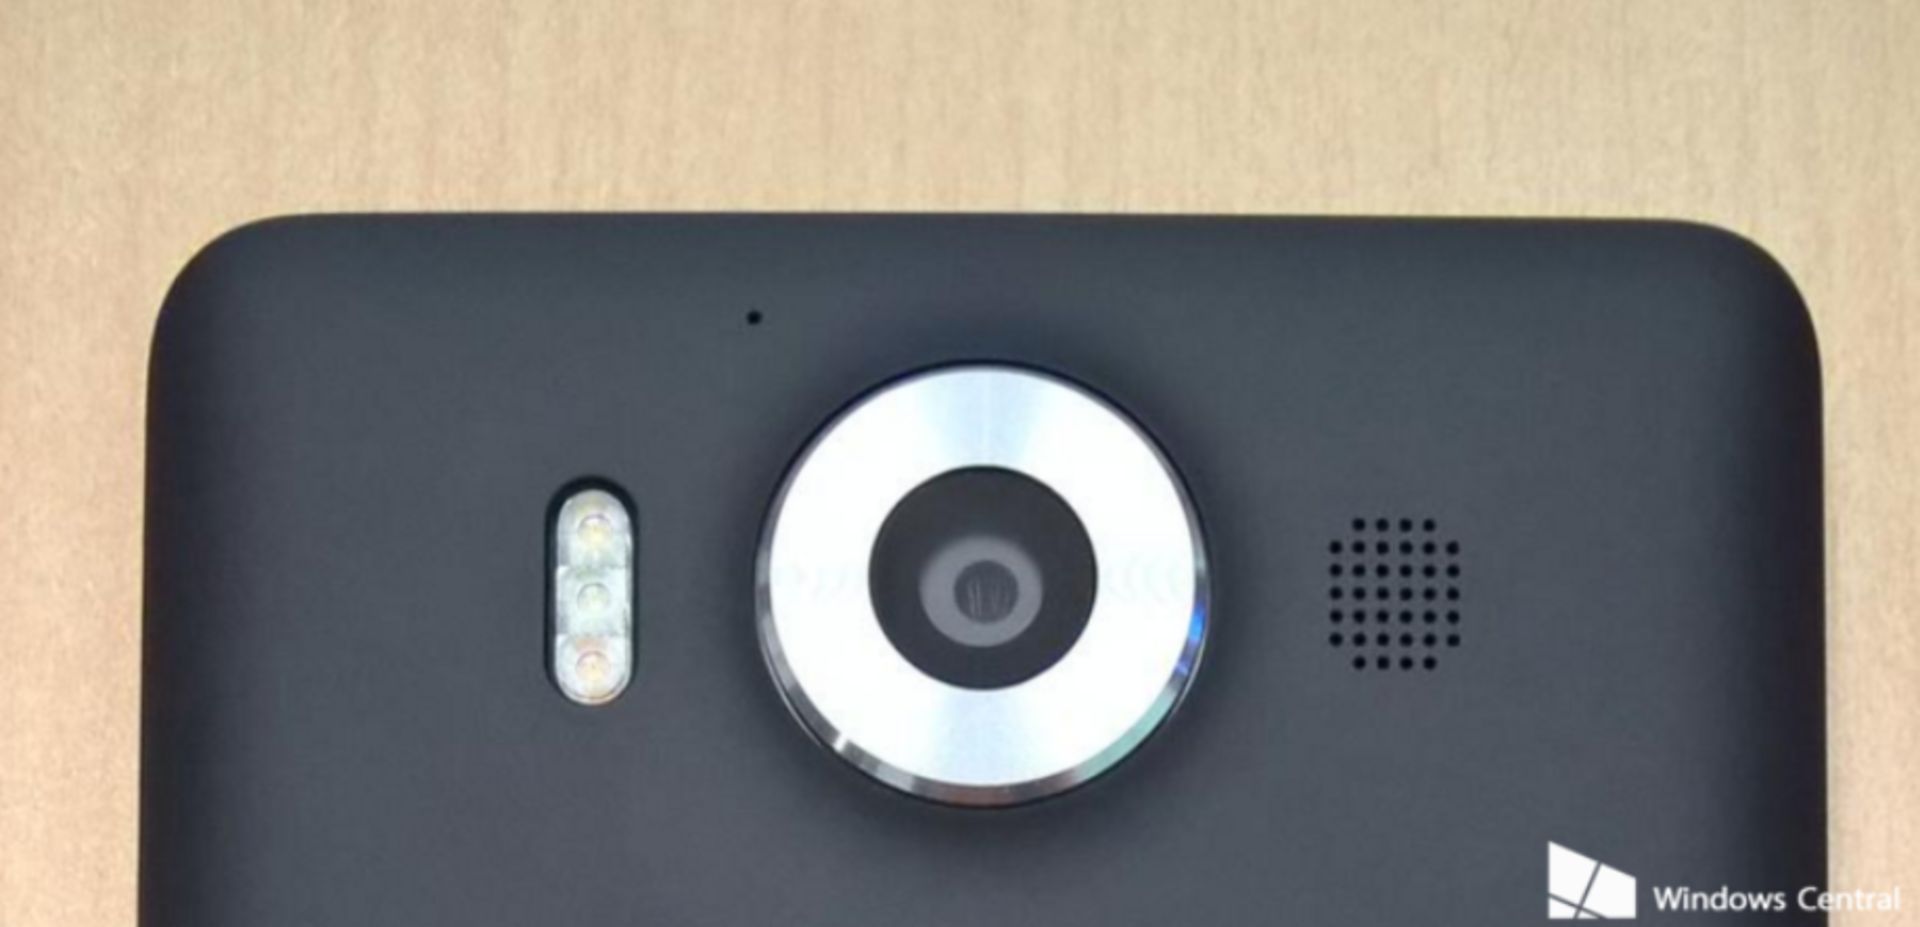 Triple LED flash is also coming with the Lumia 950.jpg